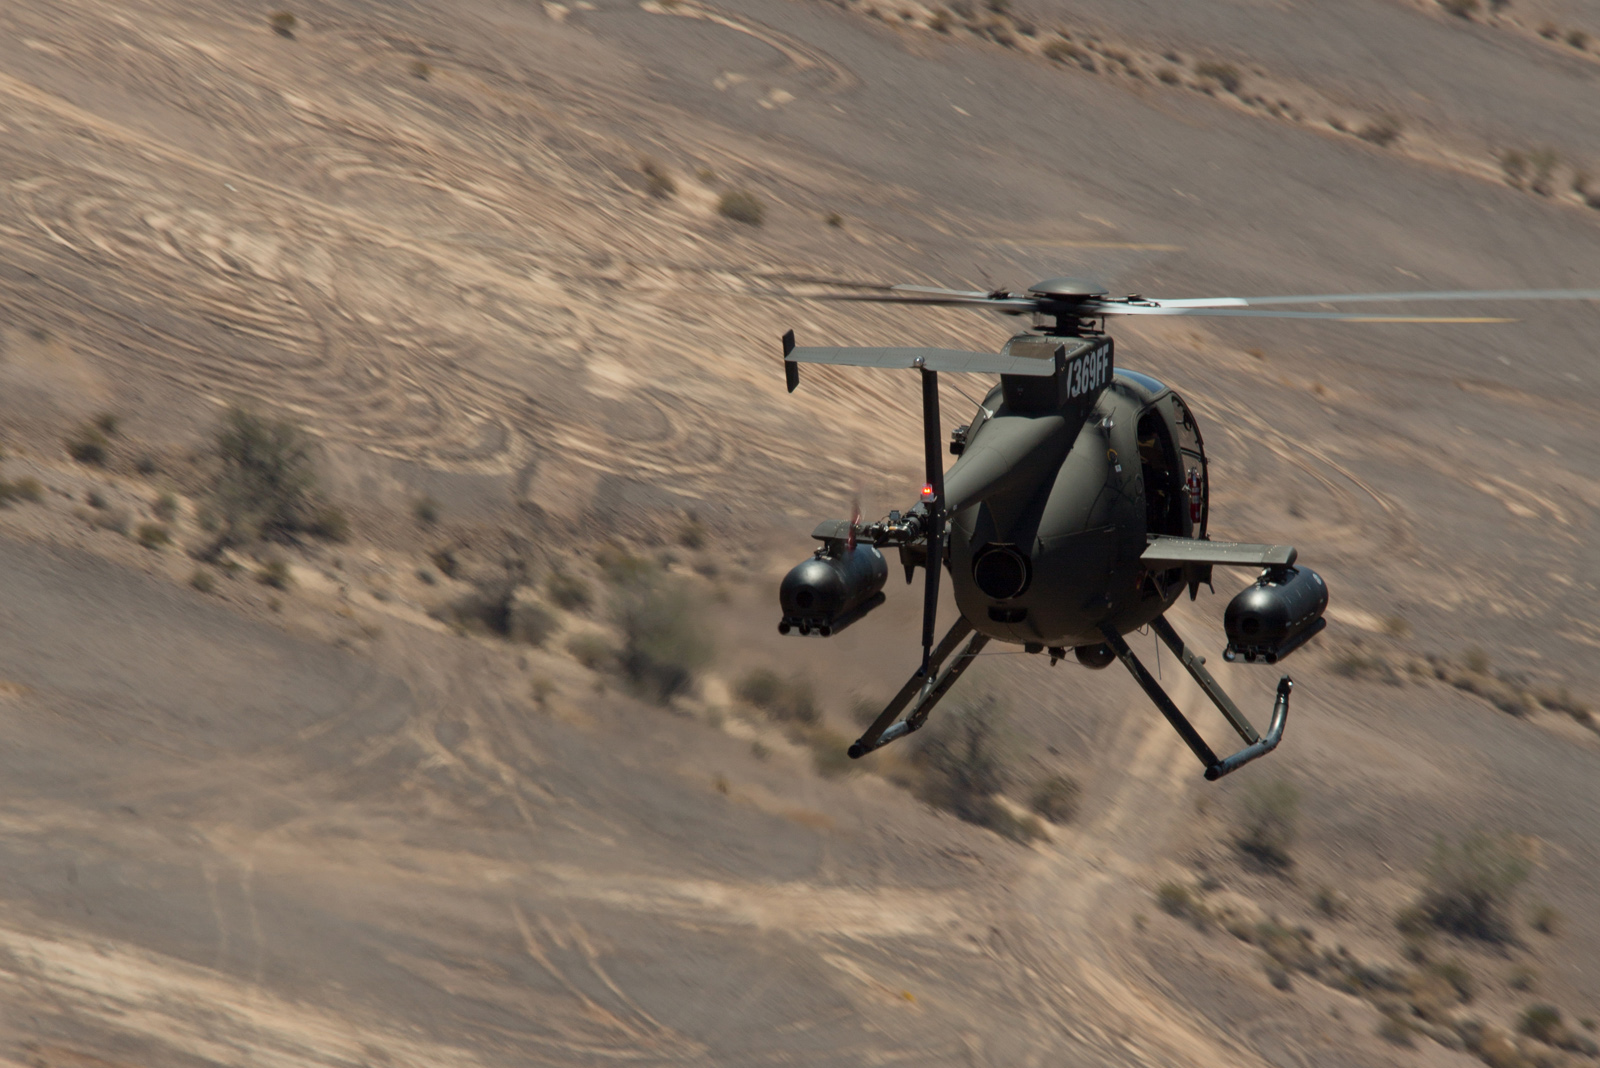 MD 530G Primary Weapons Testing - Yuma Proving Ground